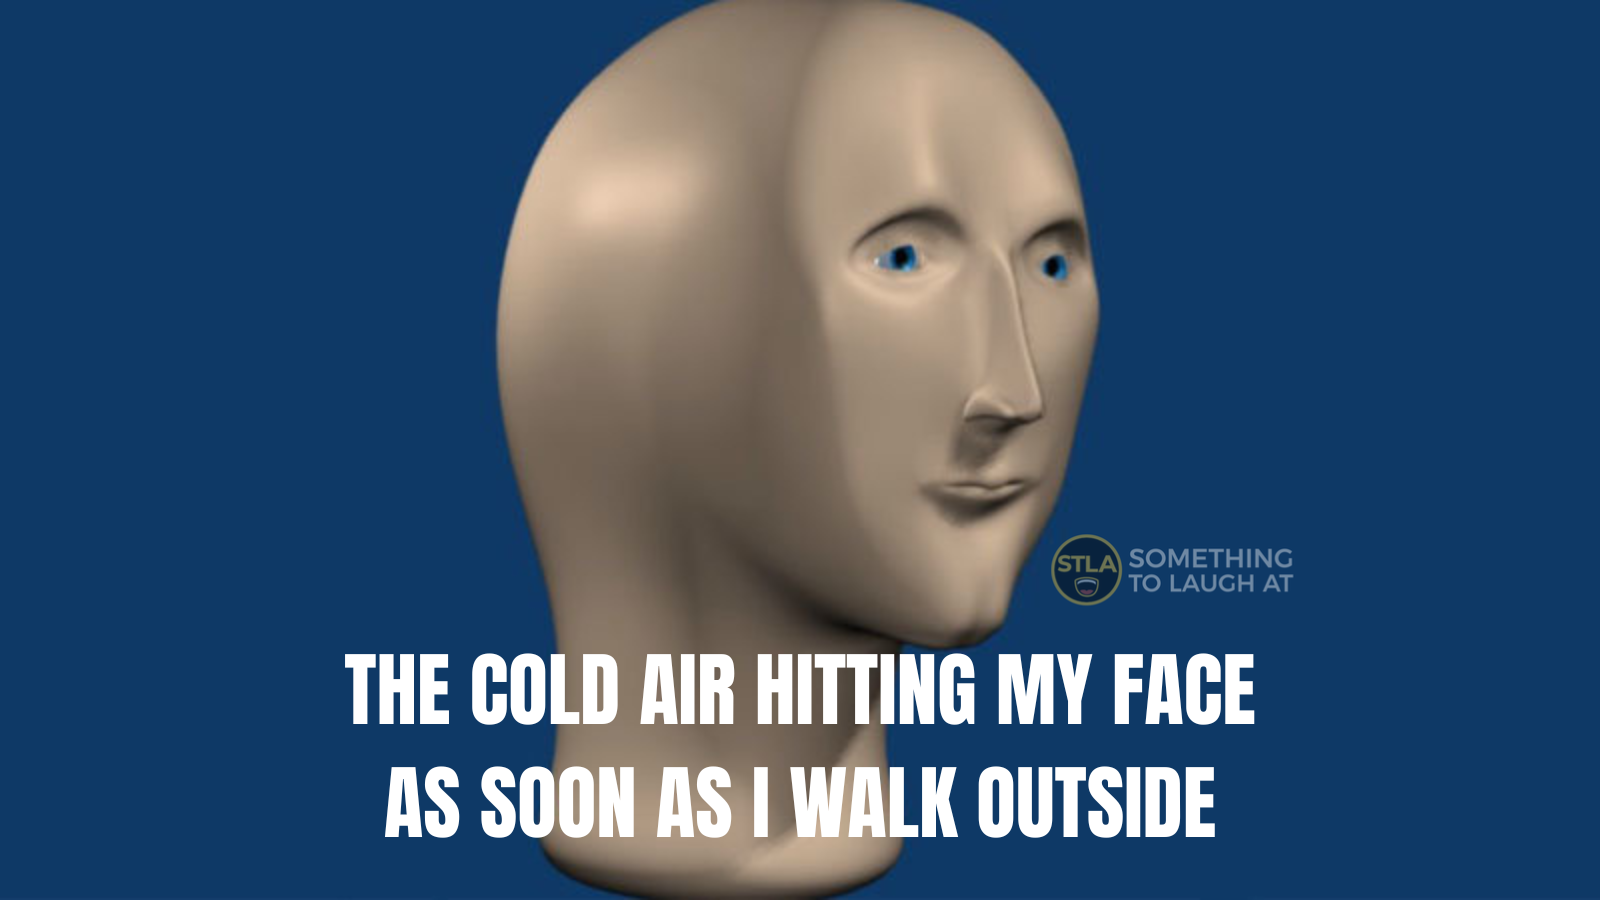 The cold air hitting my face as soon as I walk outside meme